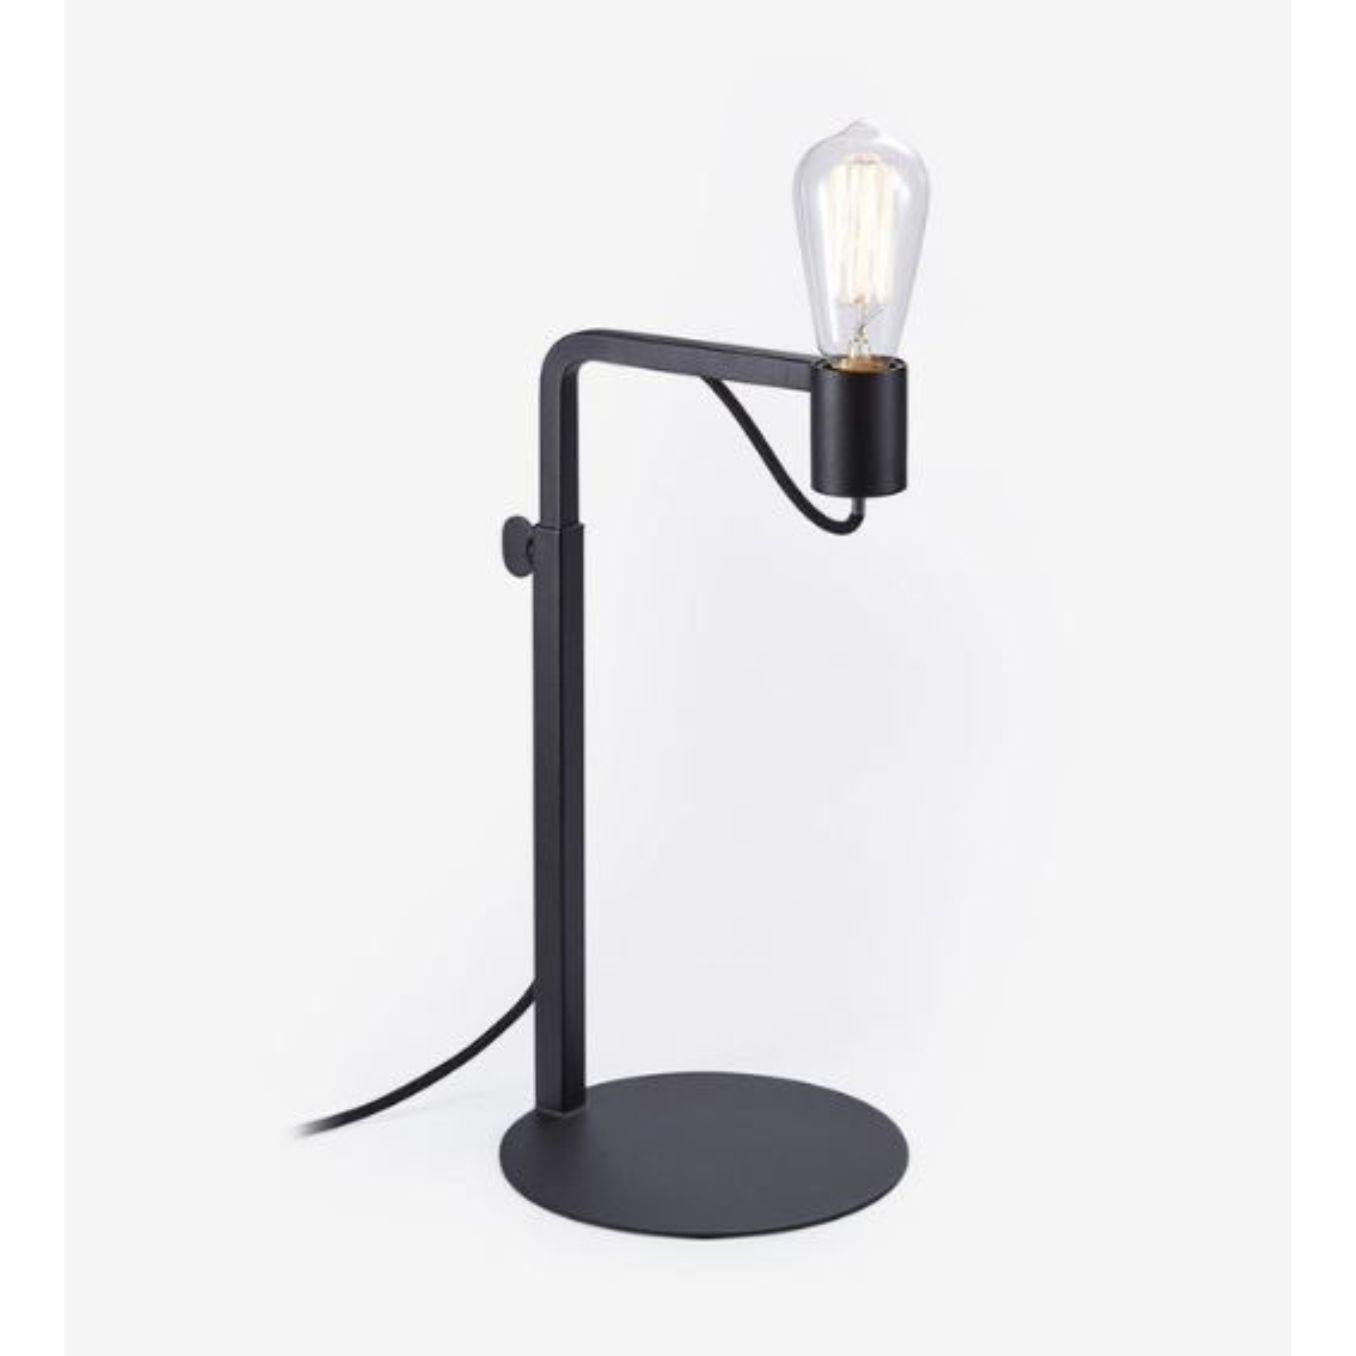 Grafit table lamp by Radar.
Design: Bastien Taillard.
Materials: Metal, fabric. 
Dimensions: W 20 x D 20 x H 38-55 cm.
Also available in solid oak (base).  

All our lamps can be wired according to each country. If sold to the USA it will be